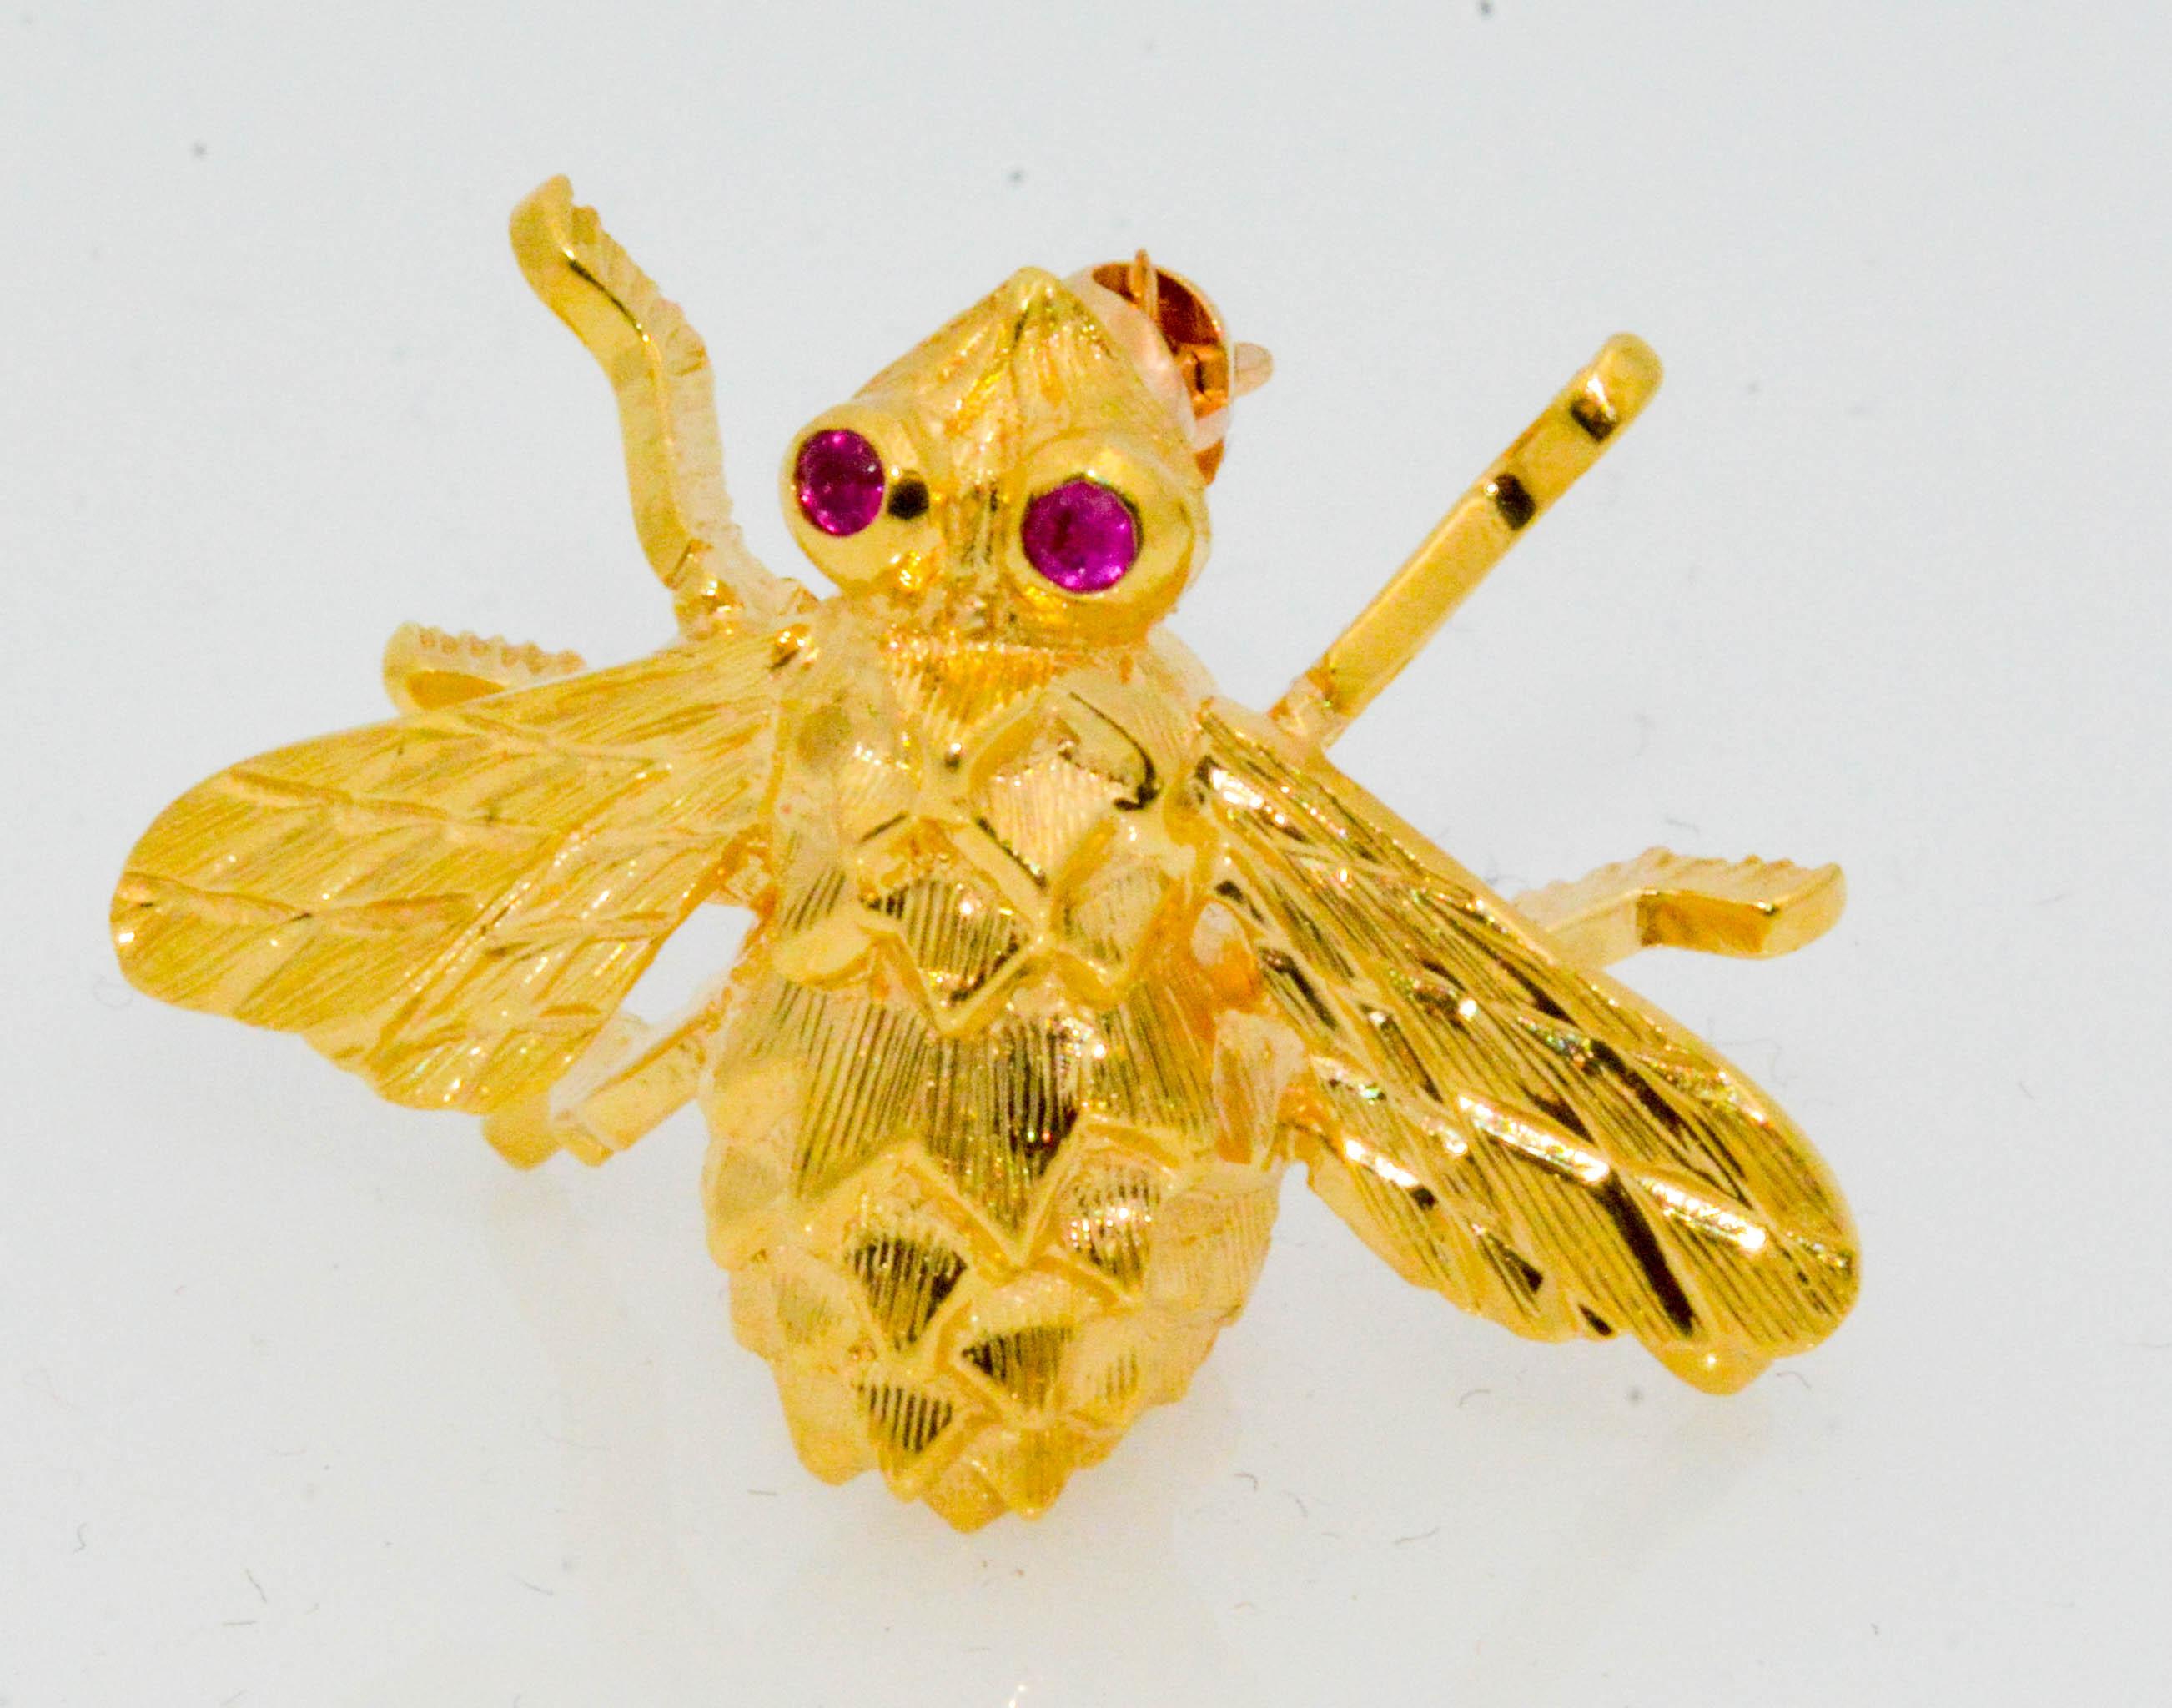 Another masterpiece creation by designer Herbert Rosenthal in this 18 karat yellow gold charming little bee brooch. This dainty little fellow has 2 ruby eyes (.04 ct) on his charming little face. Notice the intricate details on the body, wings and